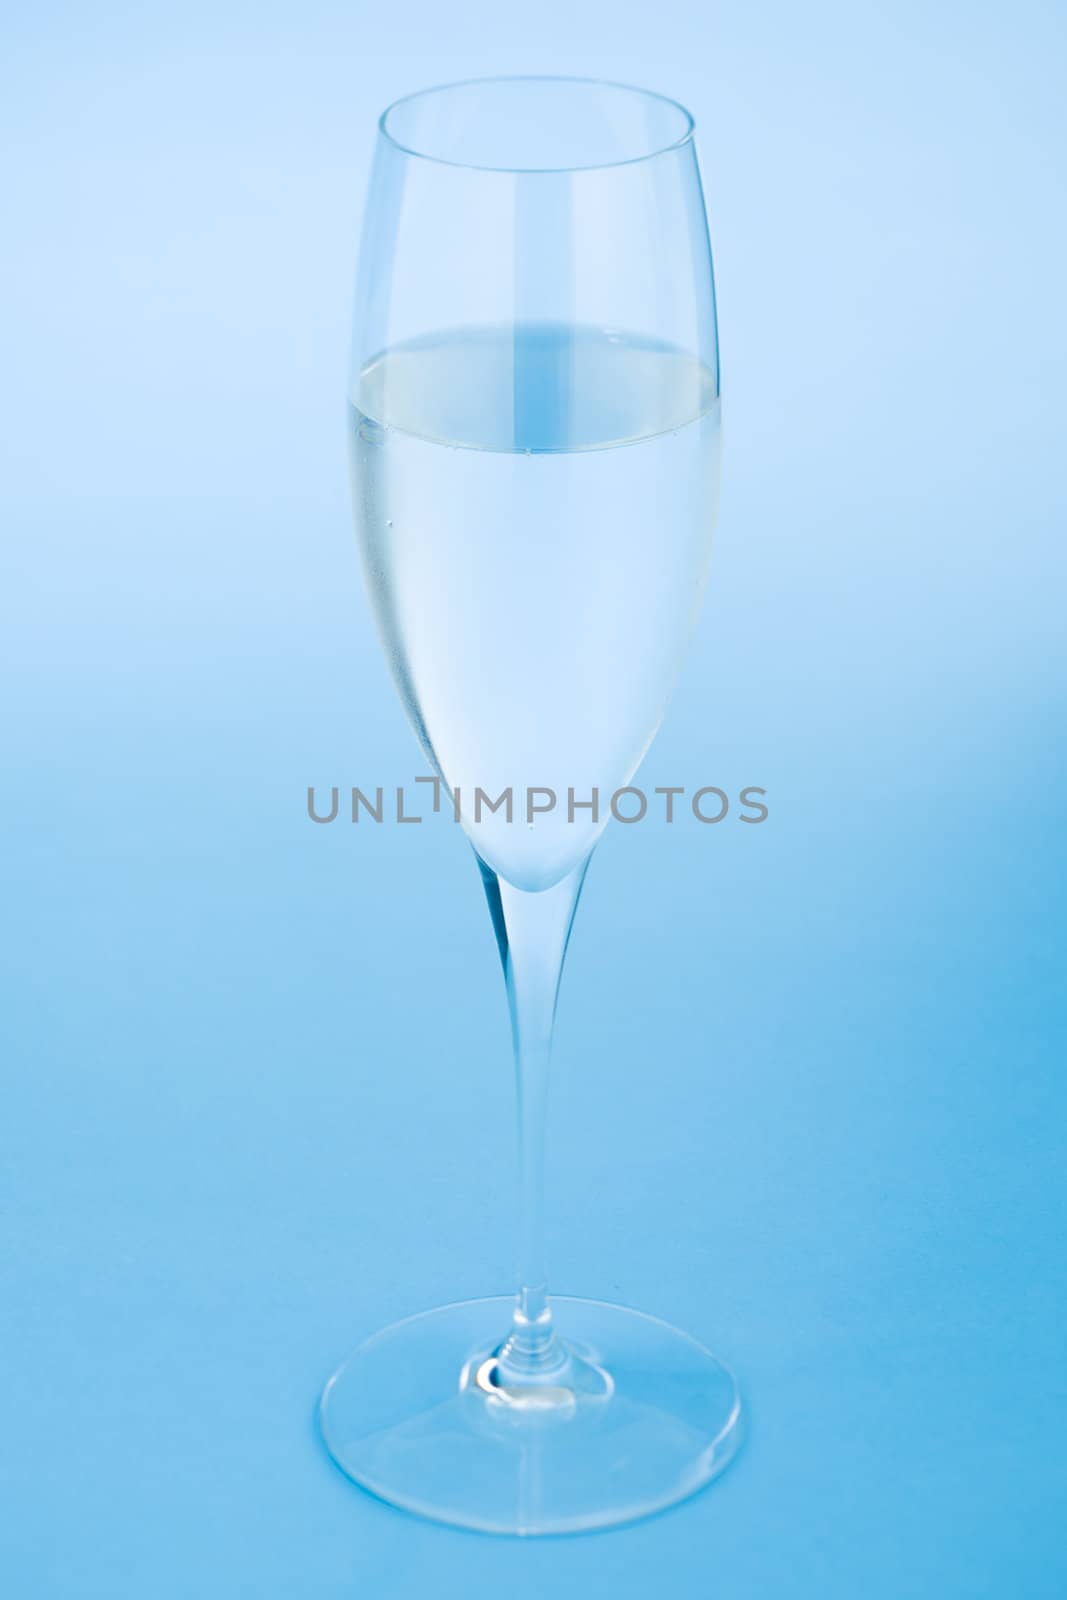 Sparkling wine glass filled with water over a blue background